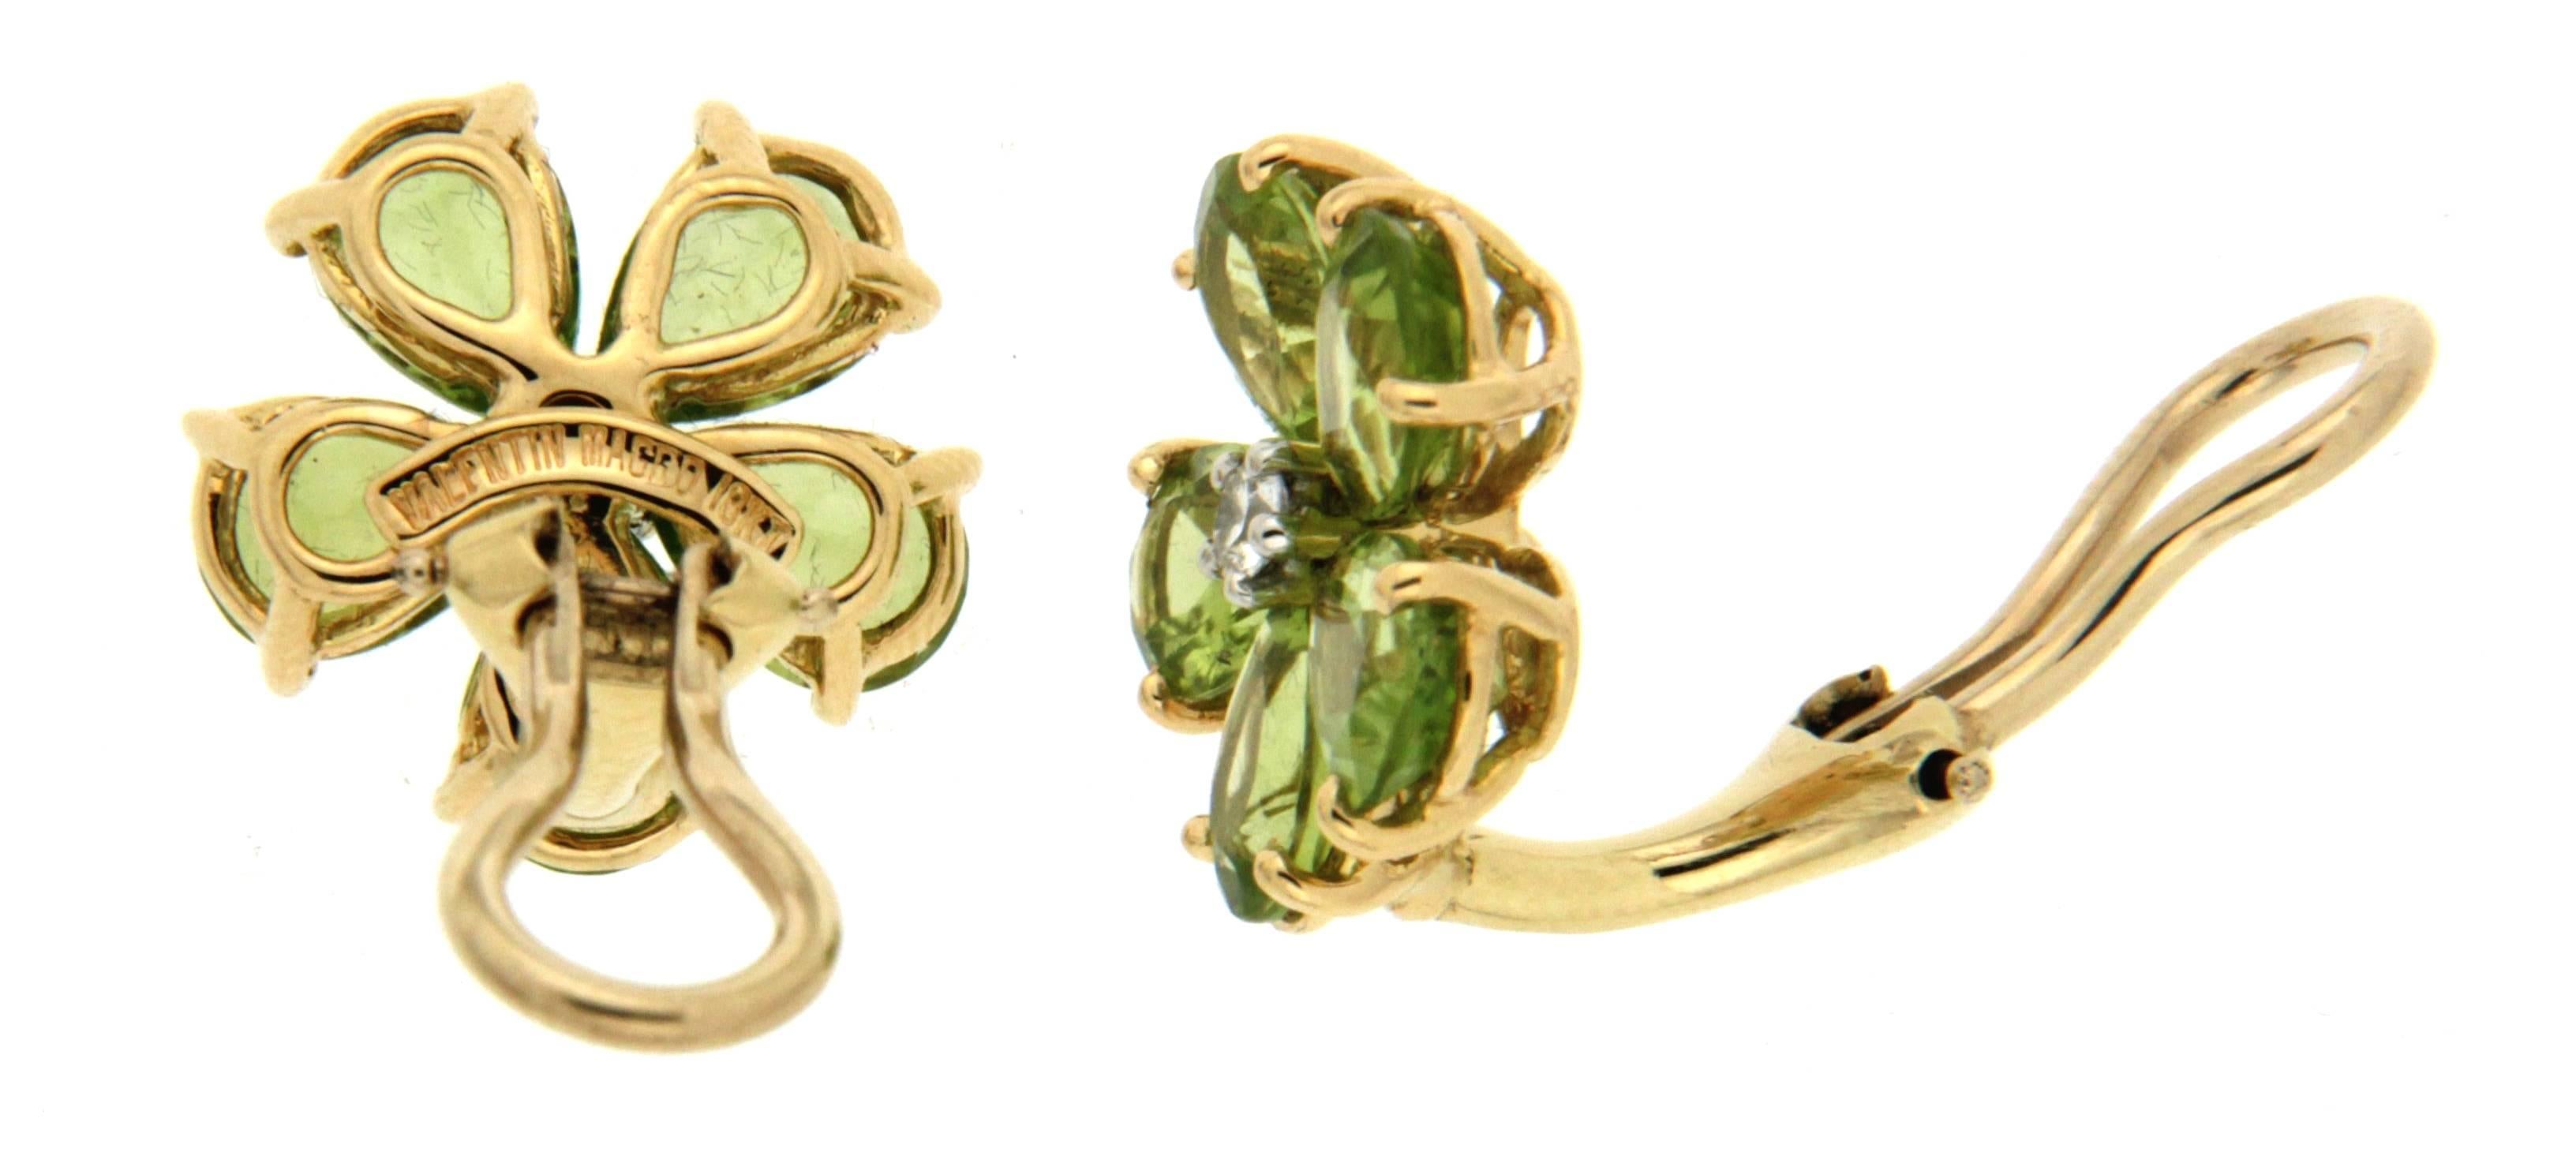 For decades, Valentin Magro's fine jewelry creations have illuminated the most special of occasions. These earrings are made in 18kt yellow gold with expert selected pear shaped Peridots that match perfectly in color and shades. The earrings have a